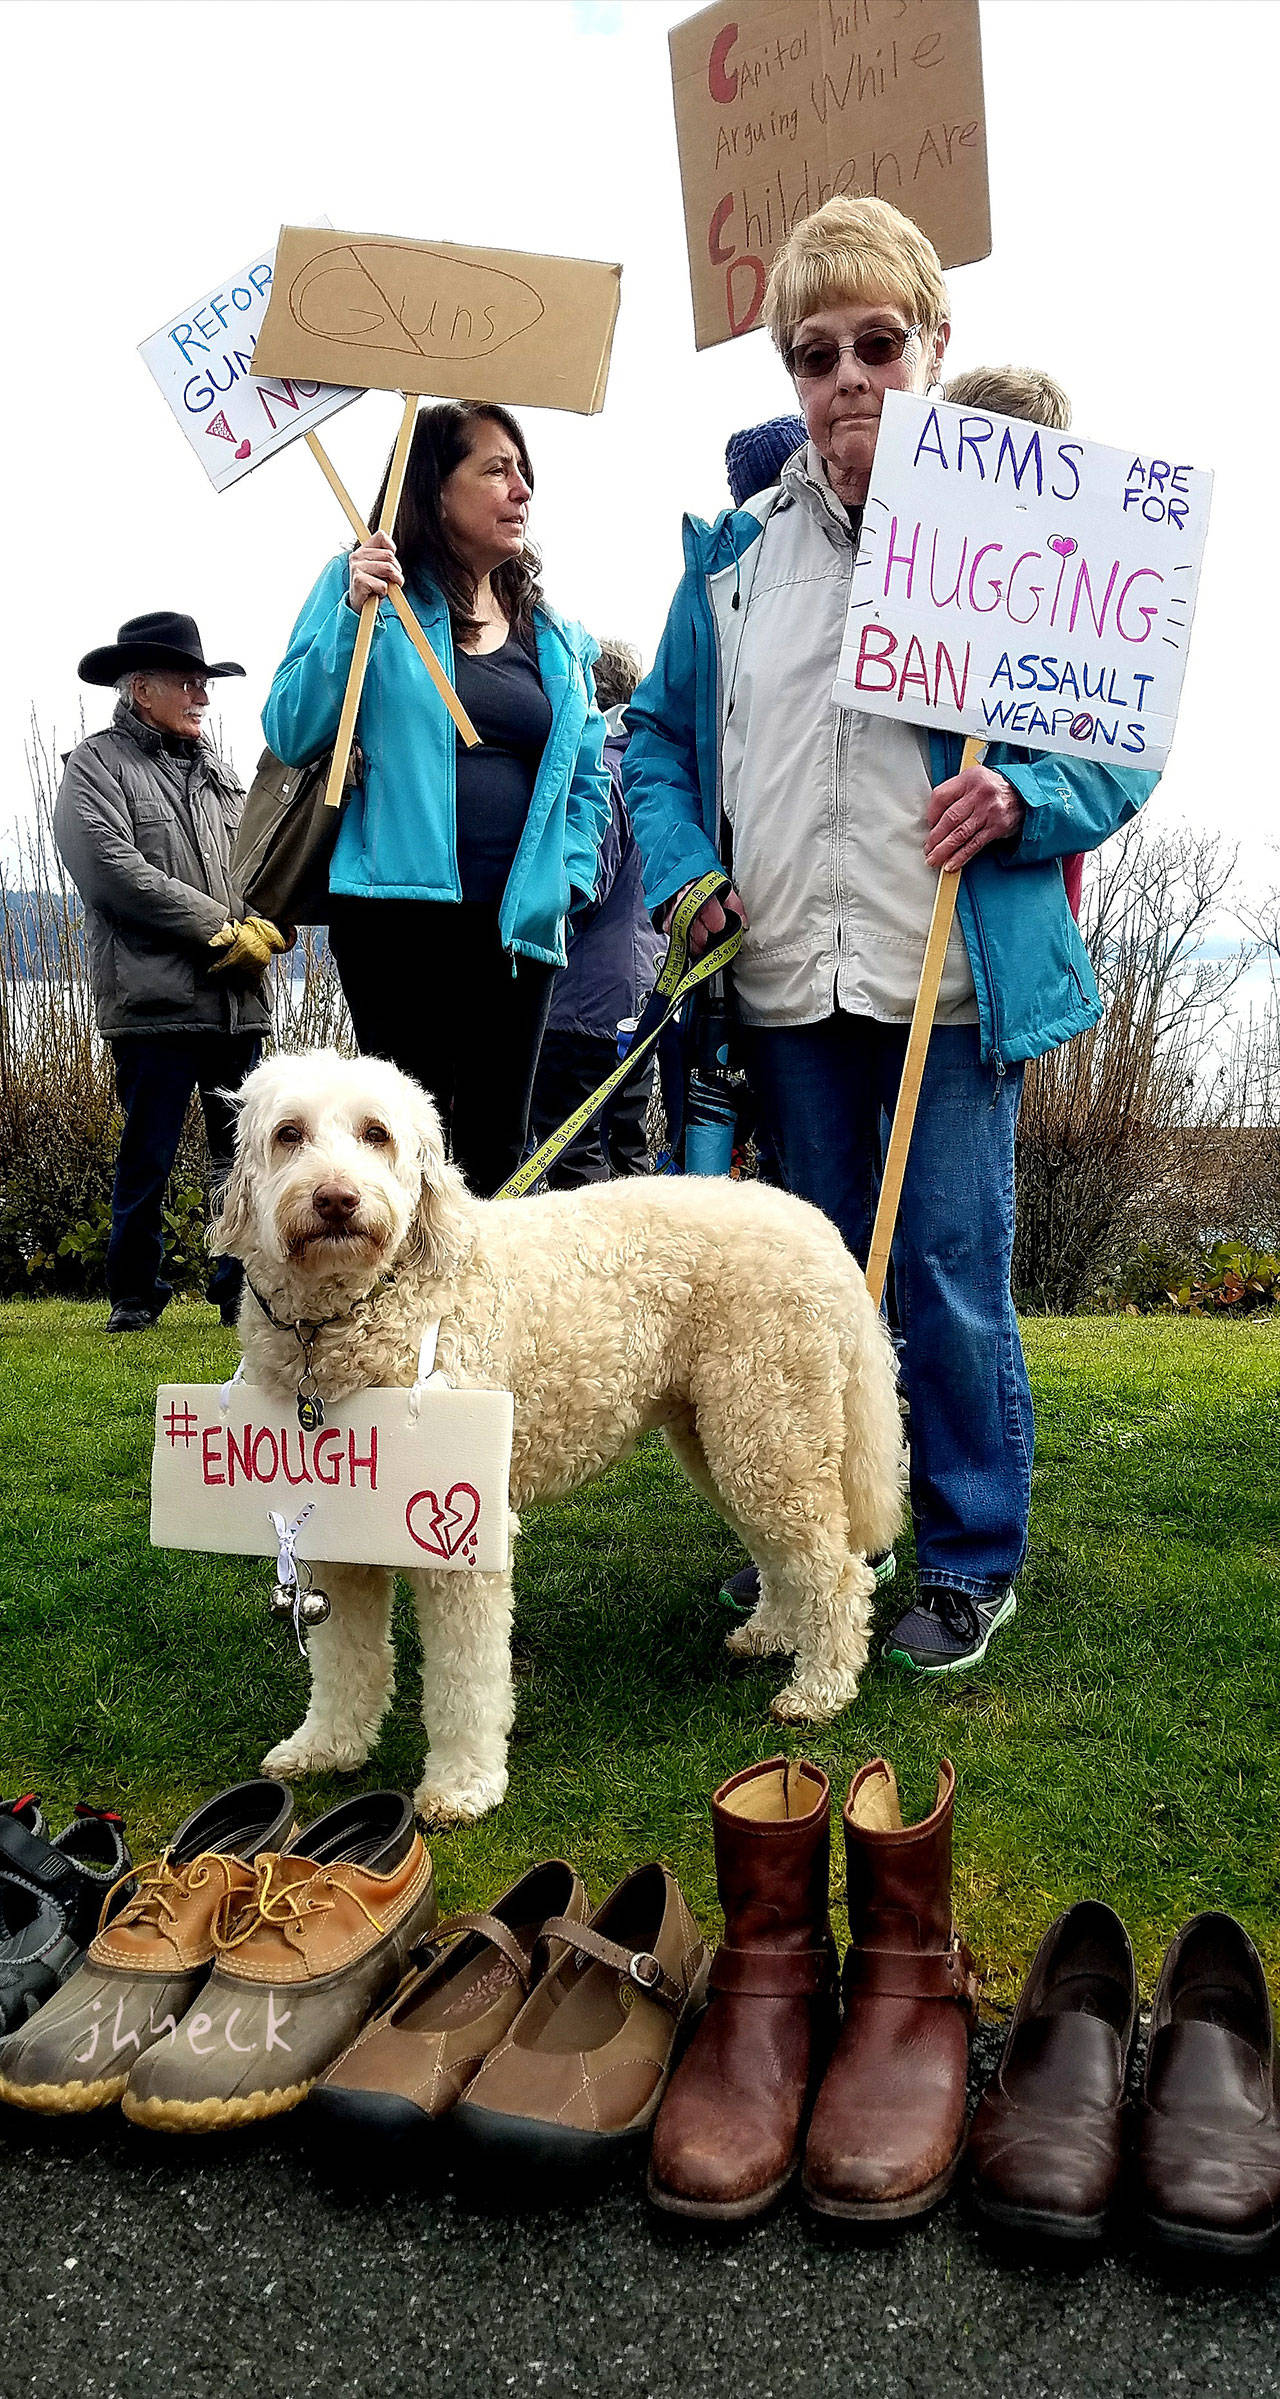 An estimated 300 people, and a few dogs, joined Langley’s March for Our Lives against gun violence Saturday, one of 800 such rallies held around the globe. Photos provided by Diane Jhueck